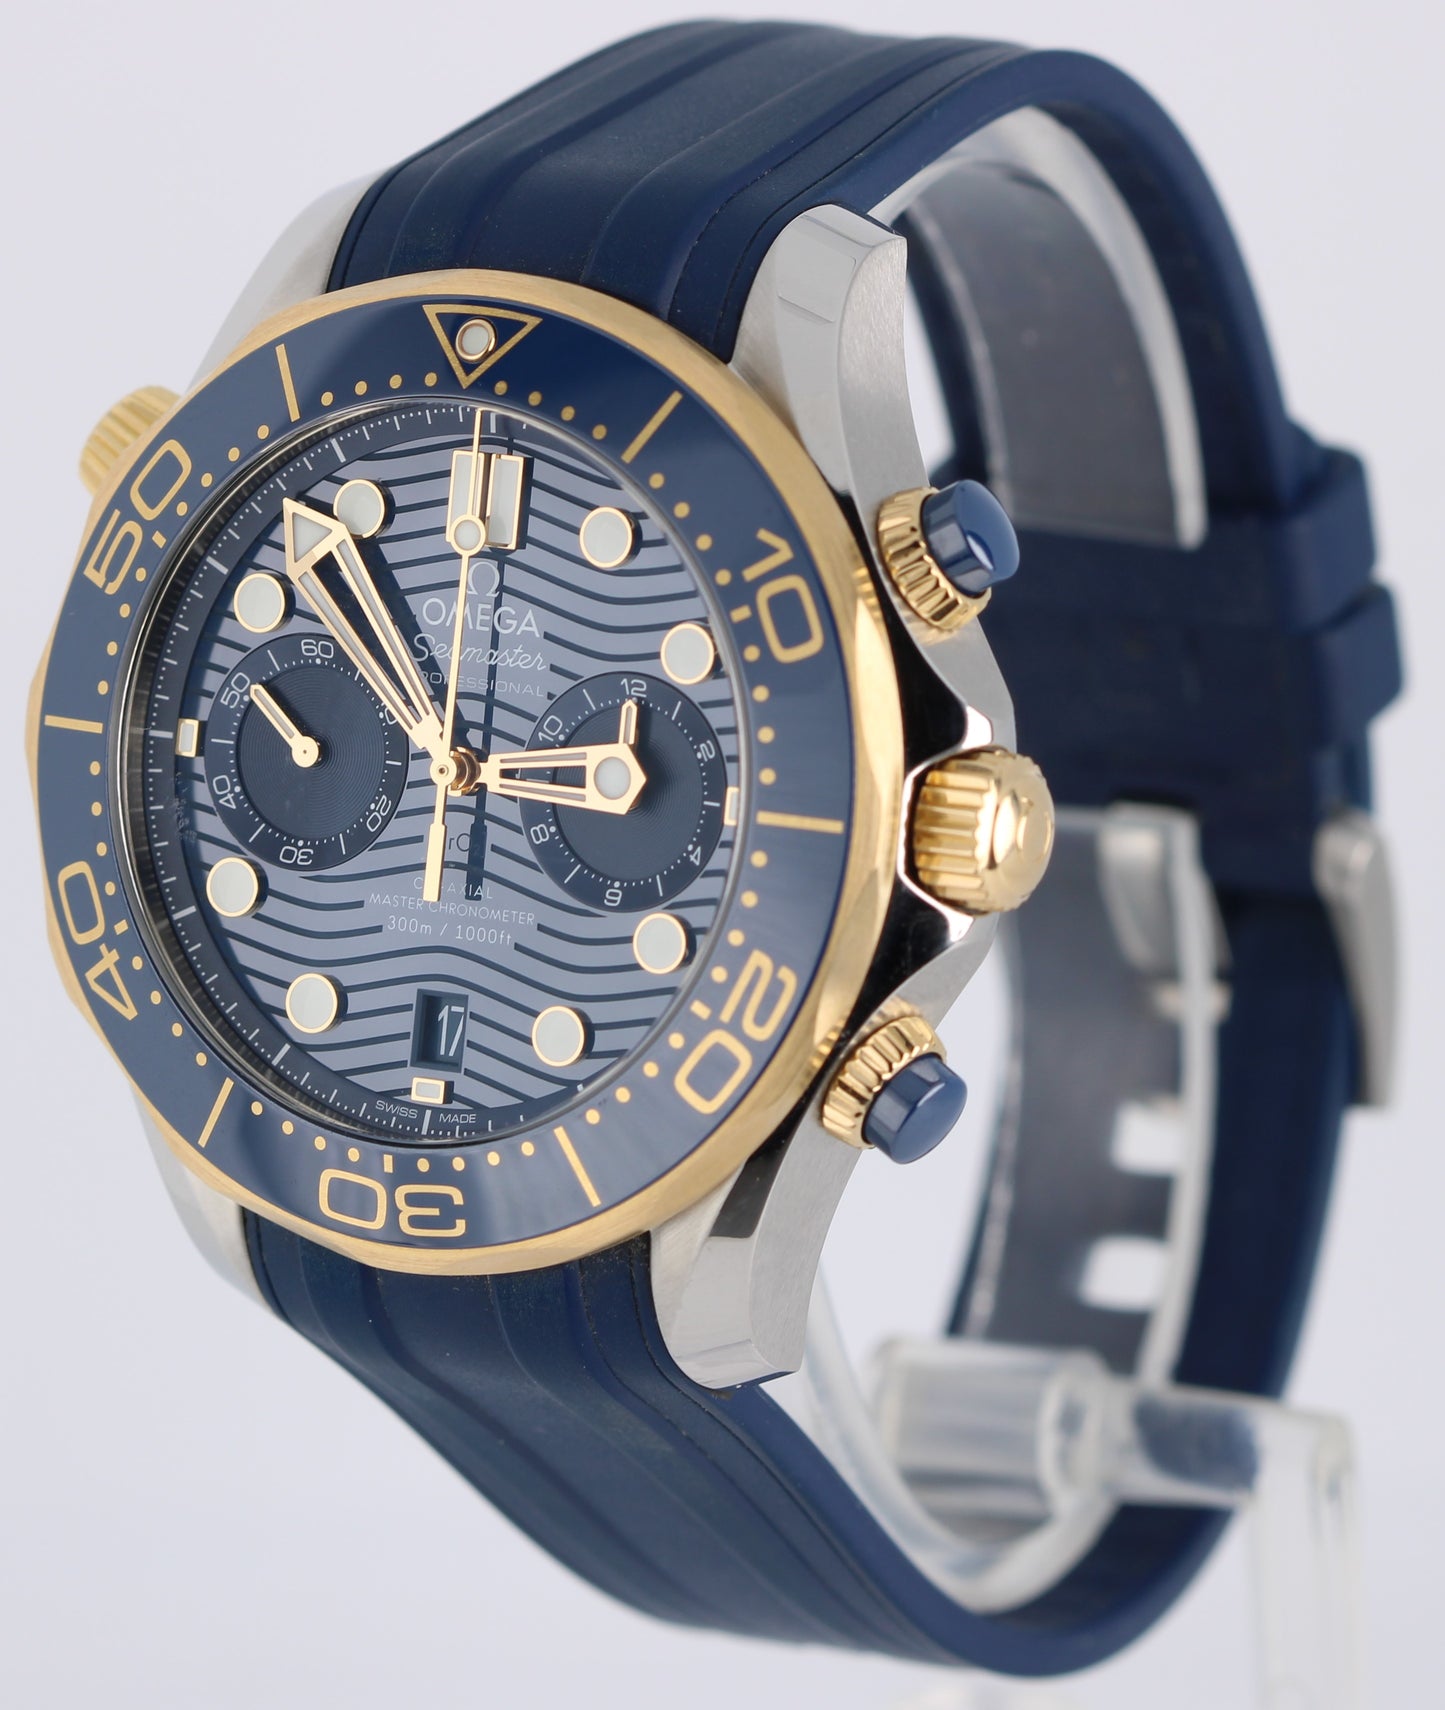 2021 PAPERS Omega Seamaster Two-Tone 18k Blue 44mm 210.22.44.51.03.001 Watch BOX